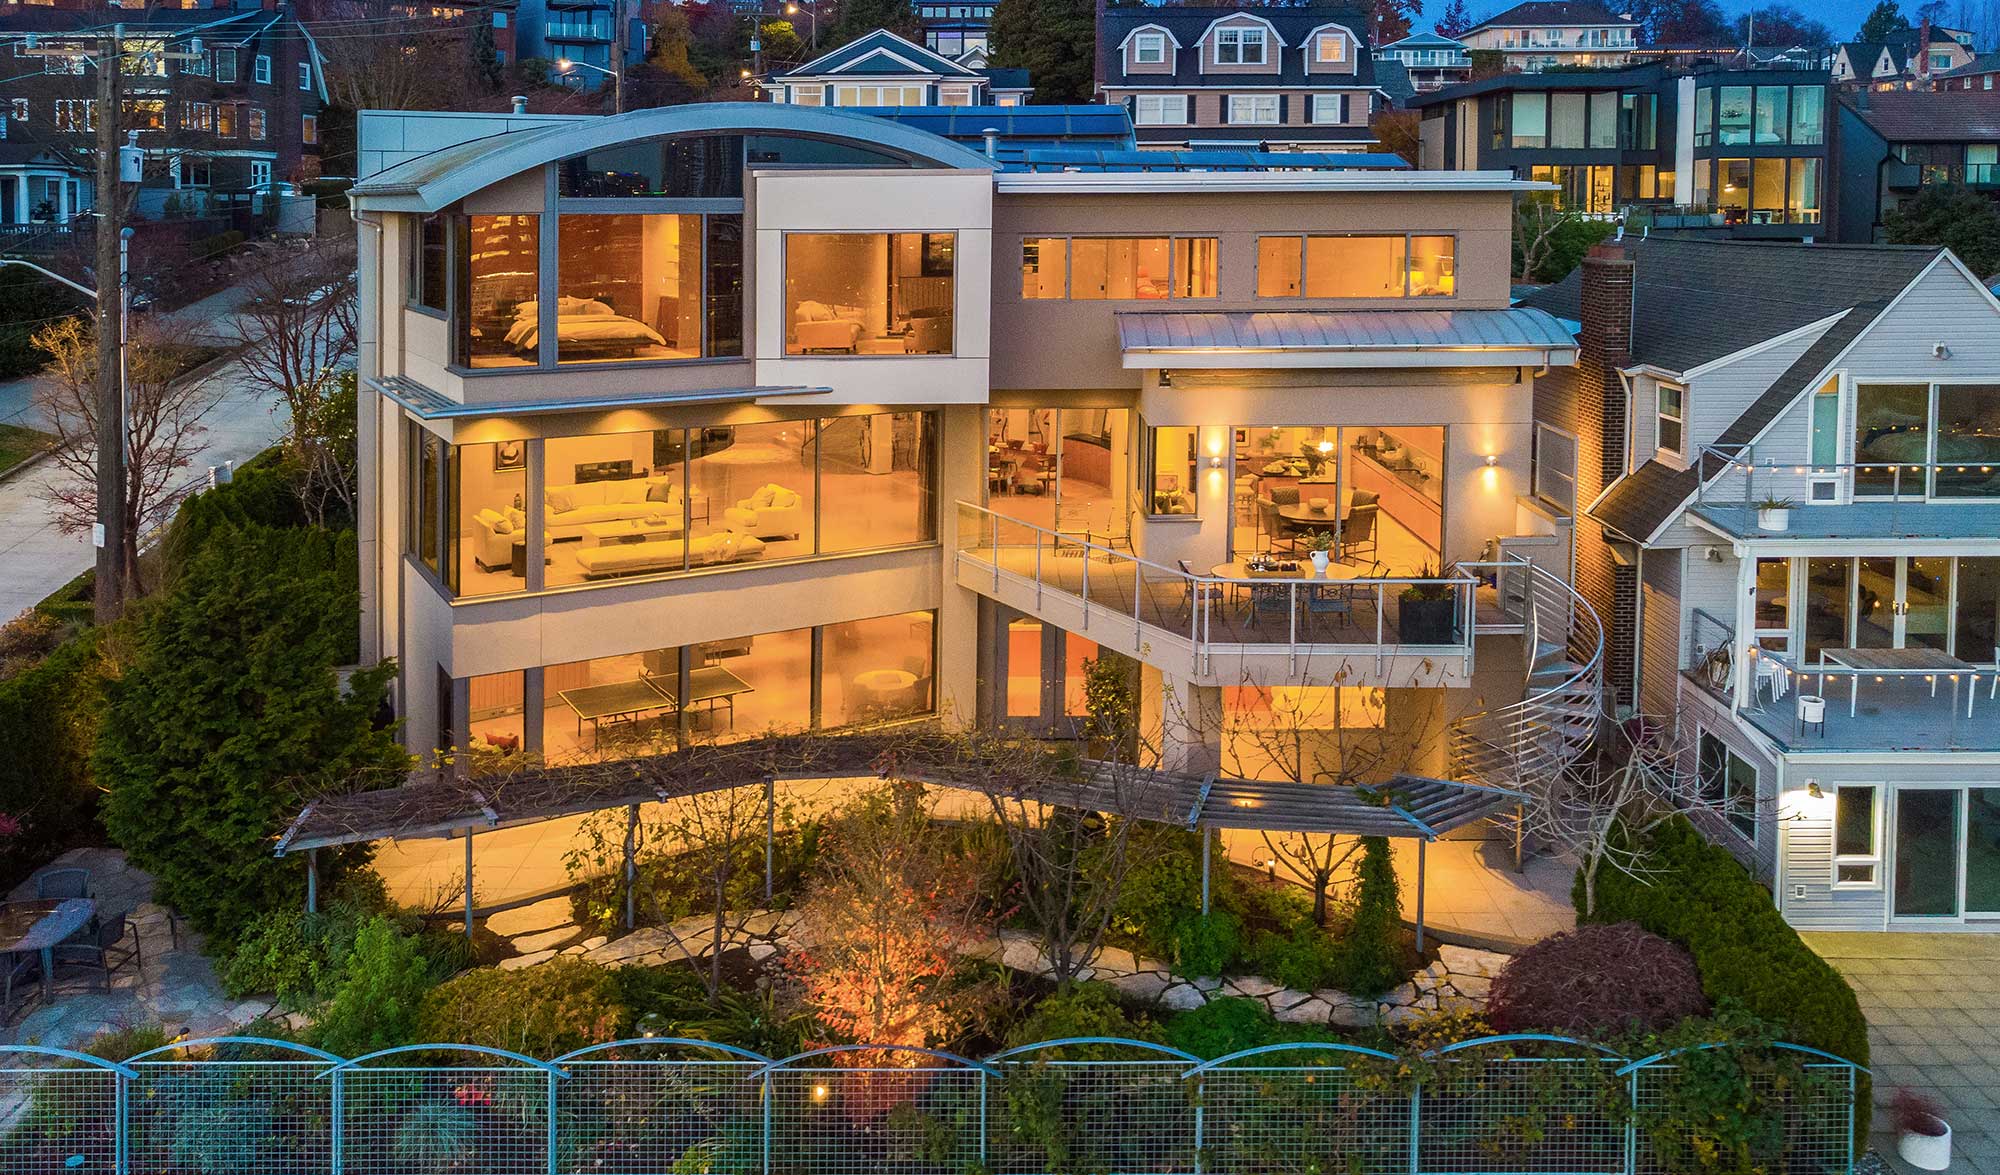 Seattle Luxury Homes Featured Seattle Luxury Homes And Estates